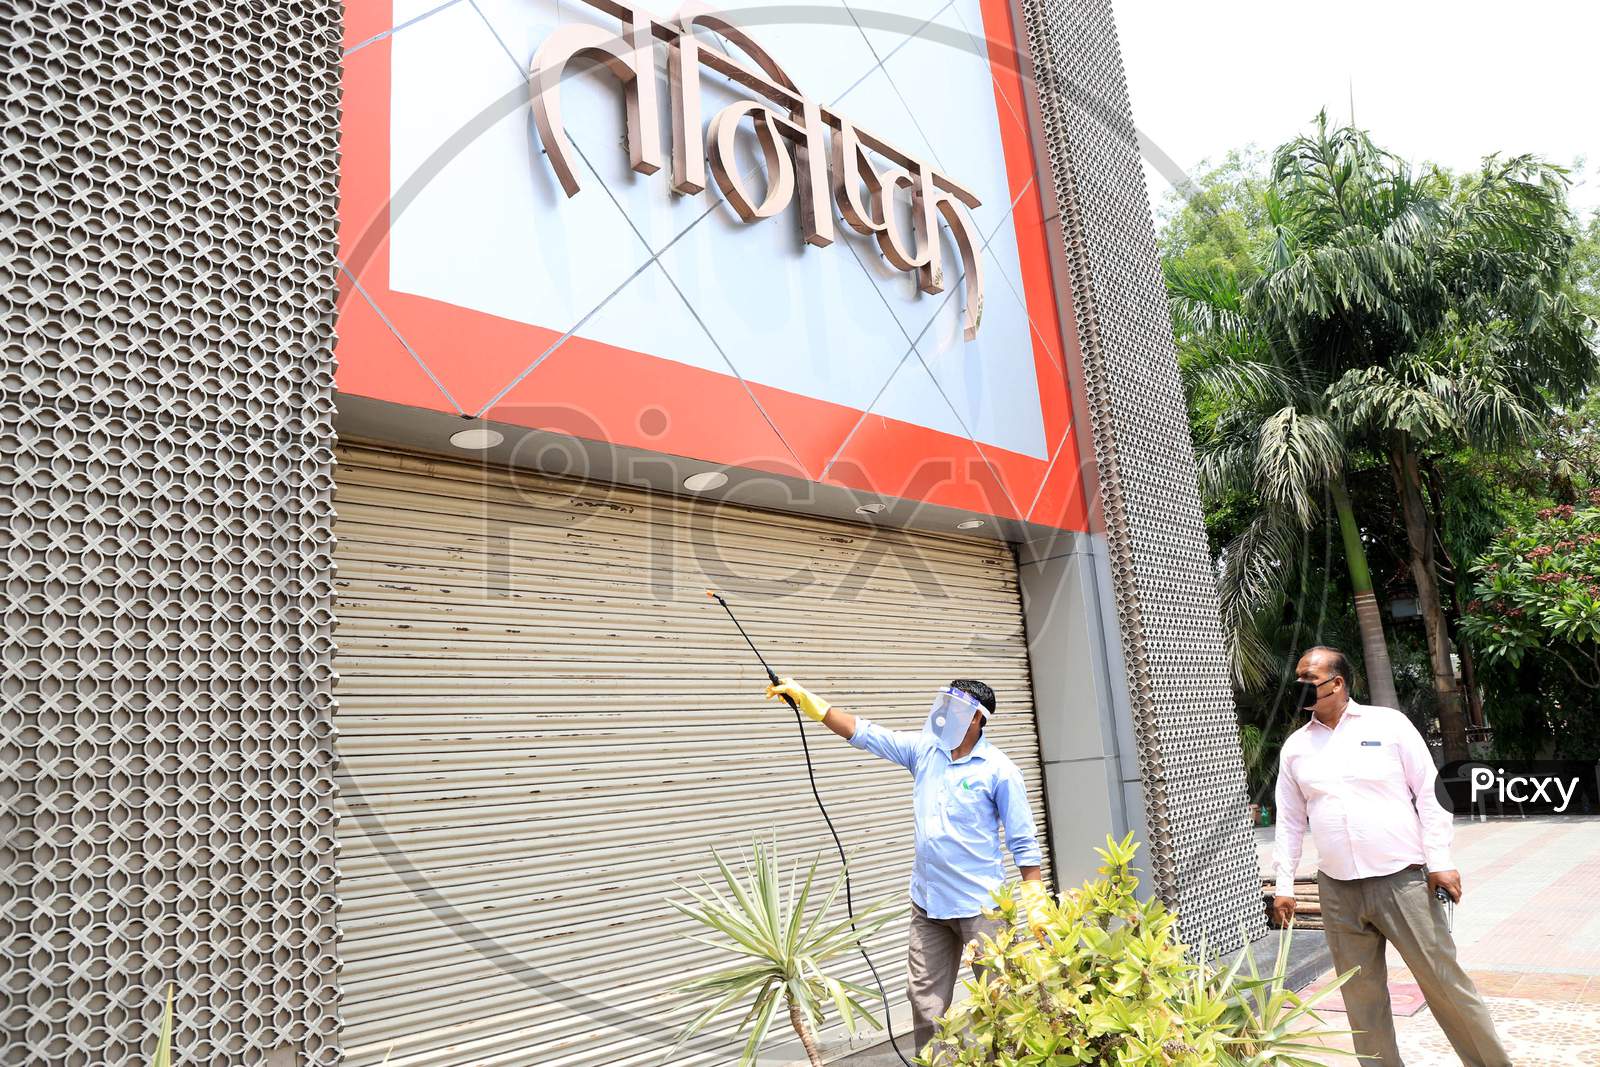 Workers Sanitise The Shop  After  Authorities Allowed Shopkeepers To Open Their Establishments With Certain Restrictions During Coronavirus or COVID-19 Pandemic in Prayagraj, May 20,2020